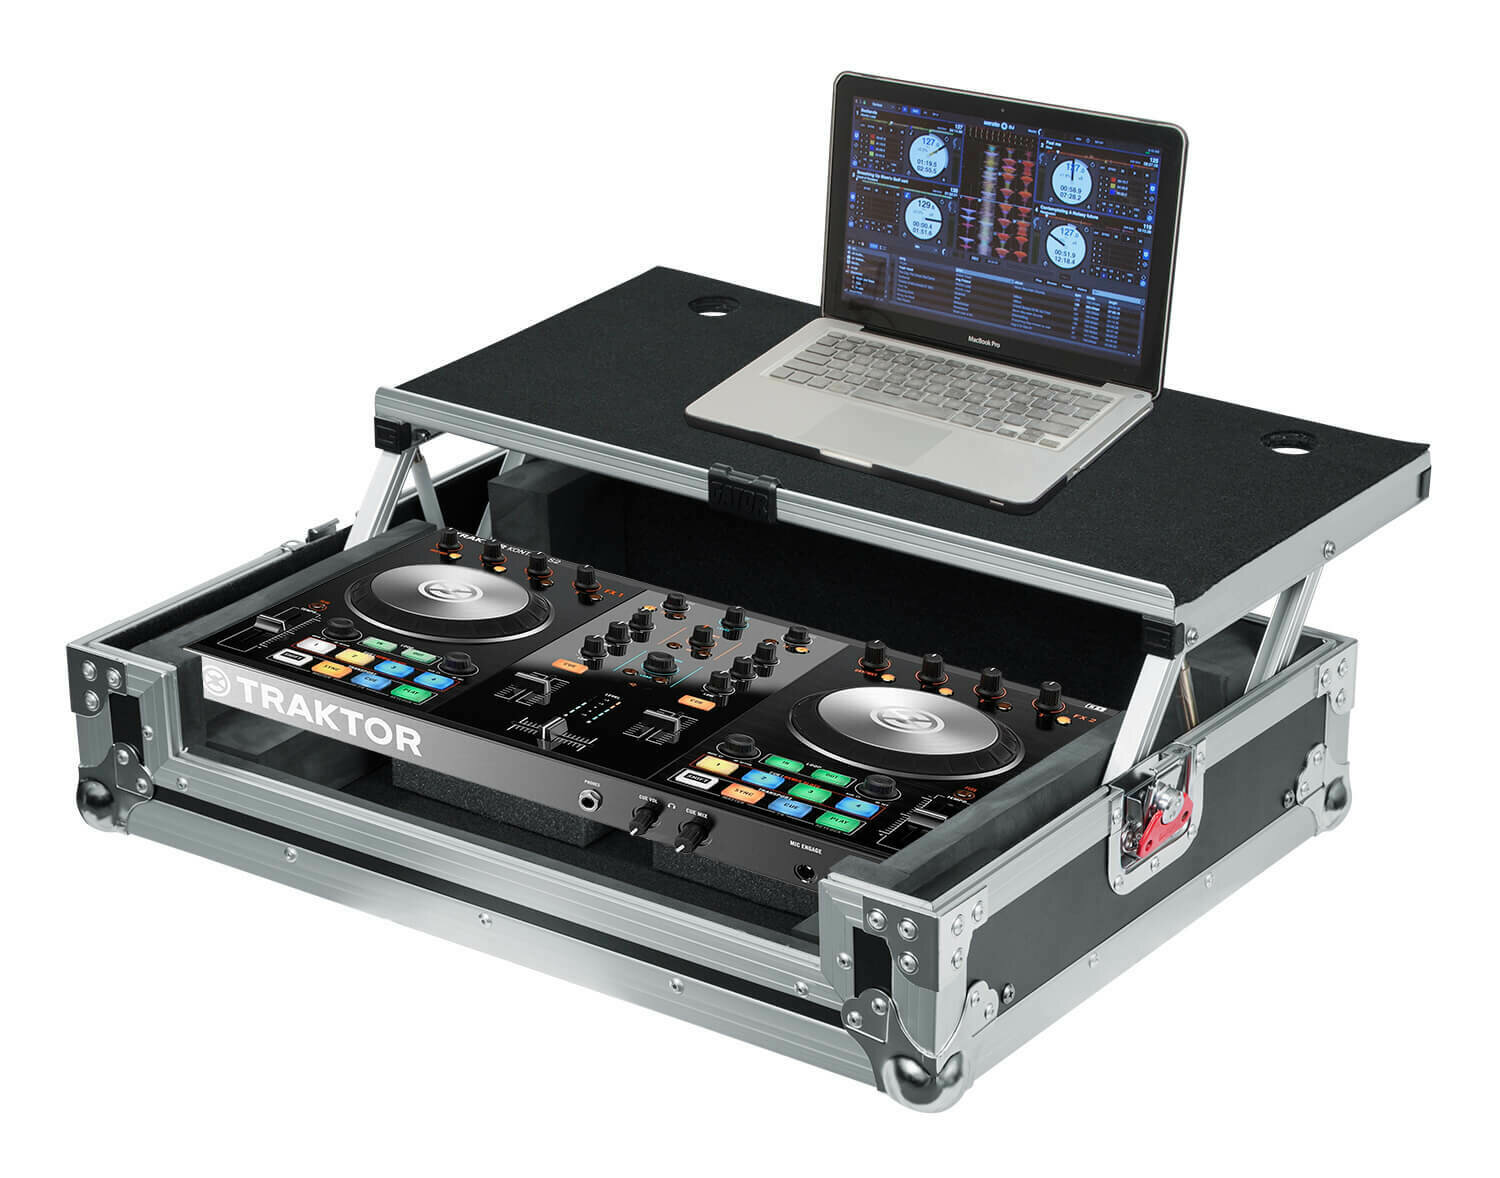 Gator Cases G-Tour Universal Fit Road Case for Small Sized DJ Controllers (Black)
#GAGTRDSPUNLC MFR #G-TOURDSPUNICNTLC